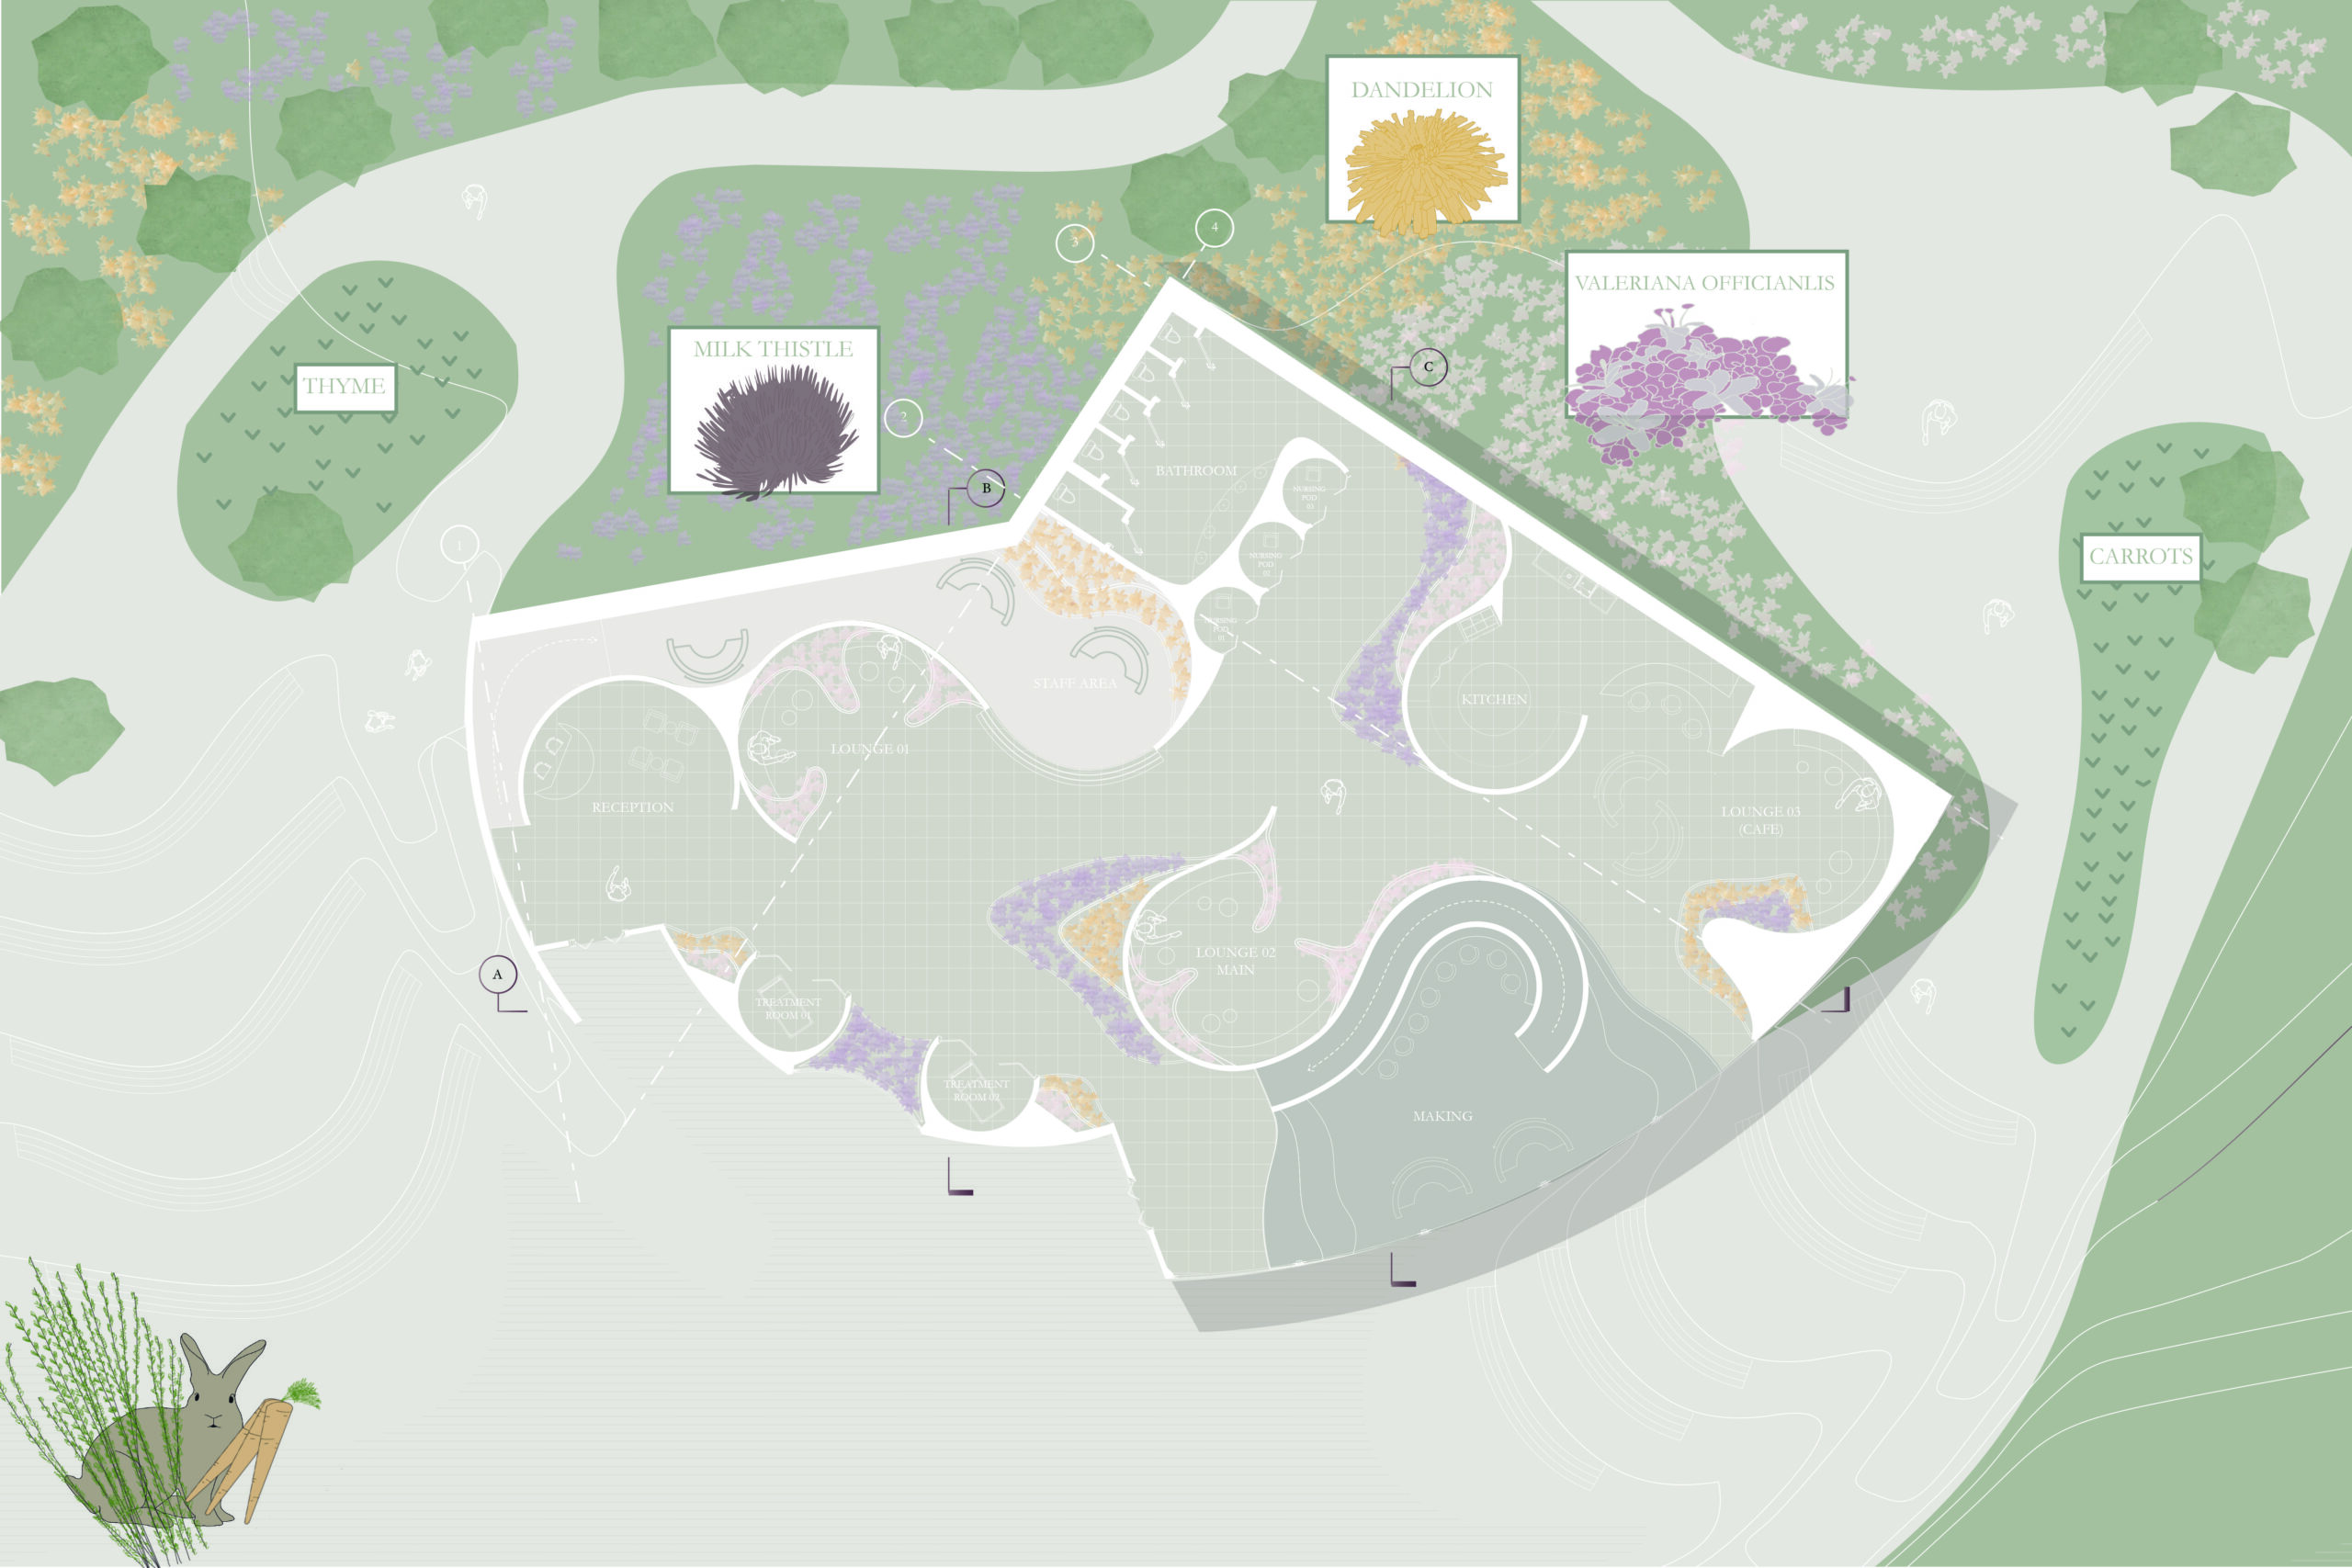 Areal view of site plan